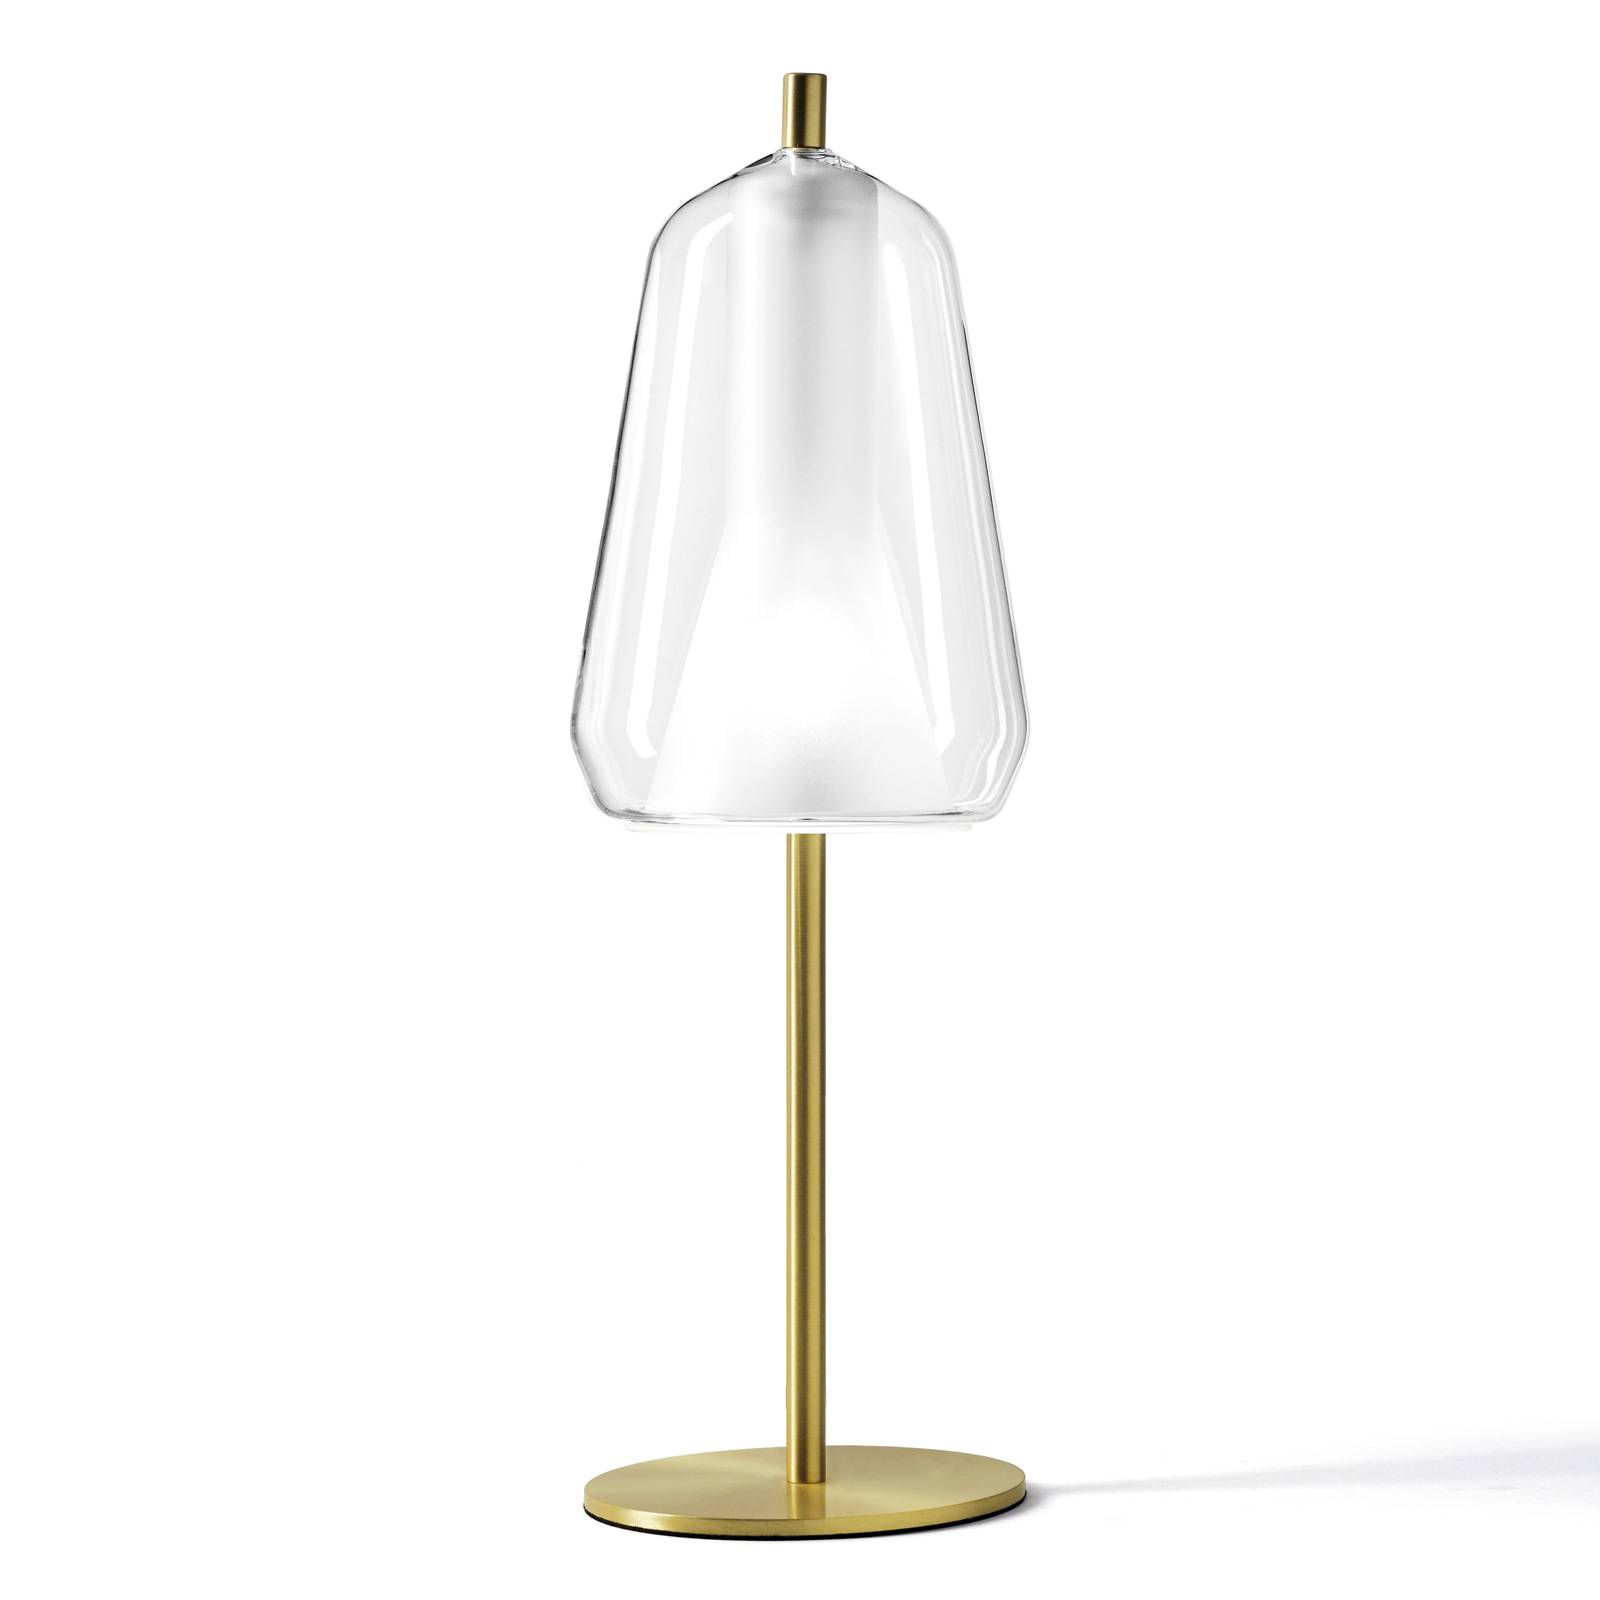 X-Ray table lamp cone lampshade 20 cm high, clear